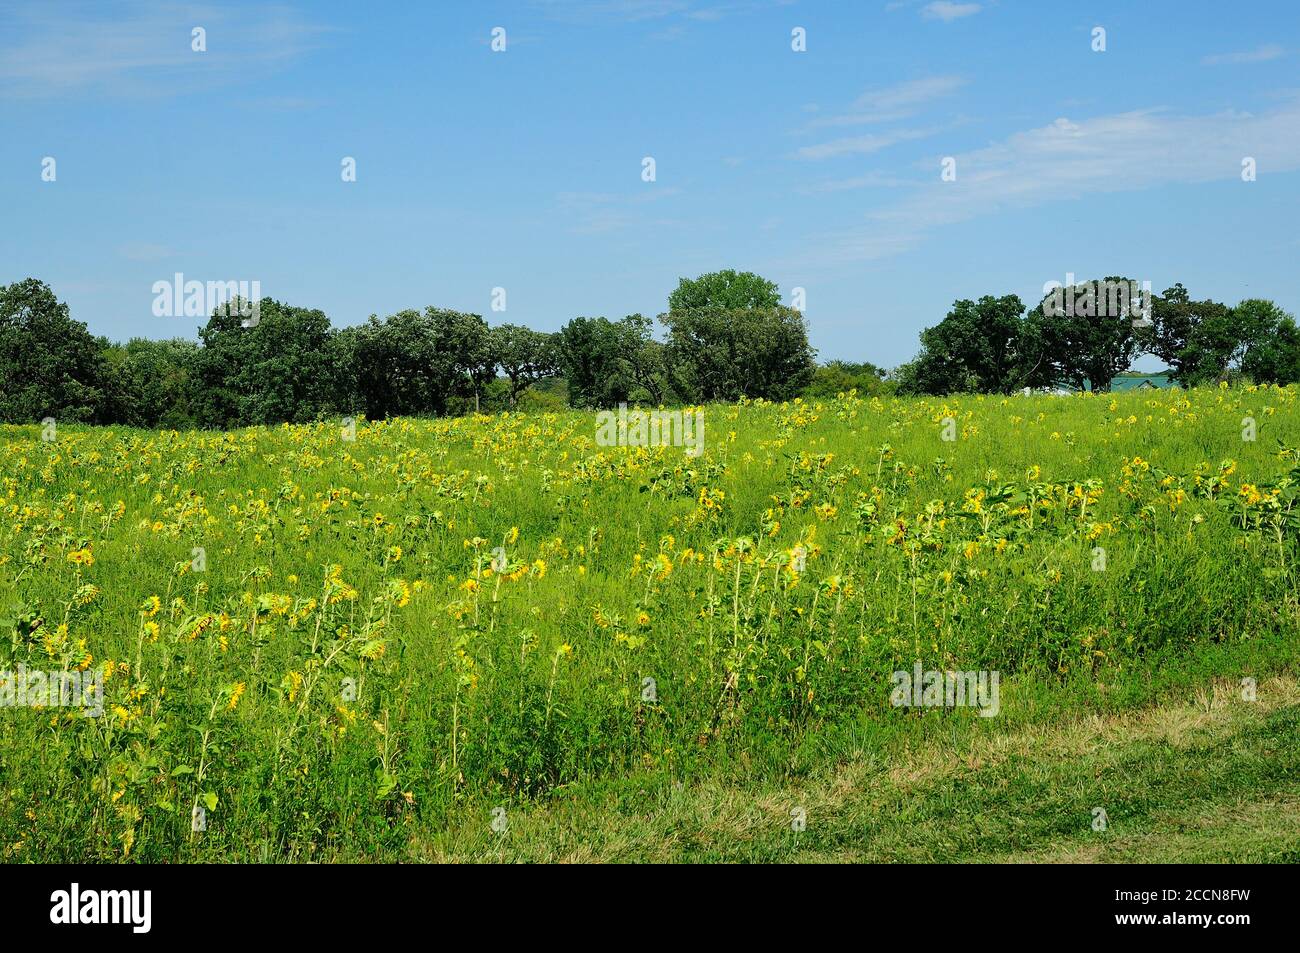 A field of sunflowers growing in Northern Illinois, USA. Stock Photo